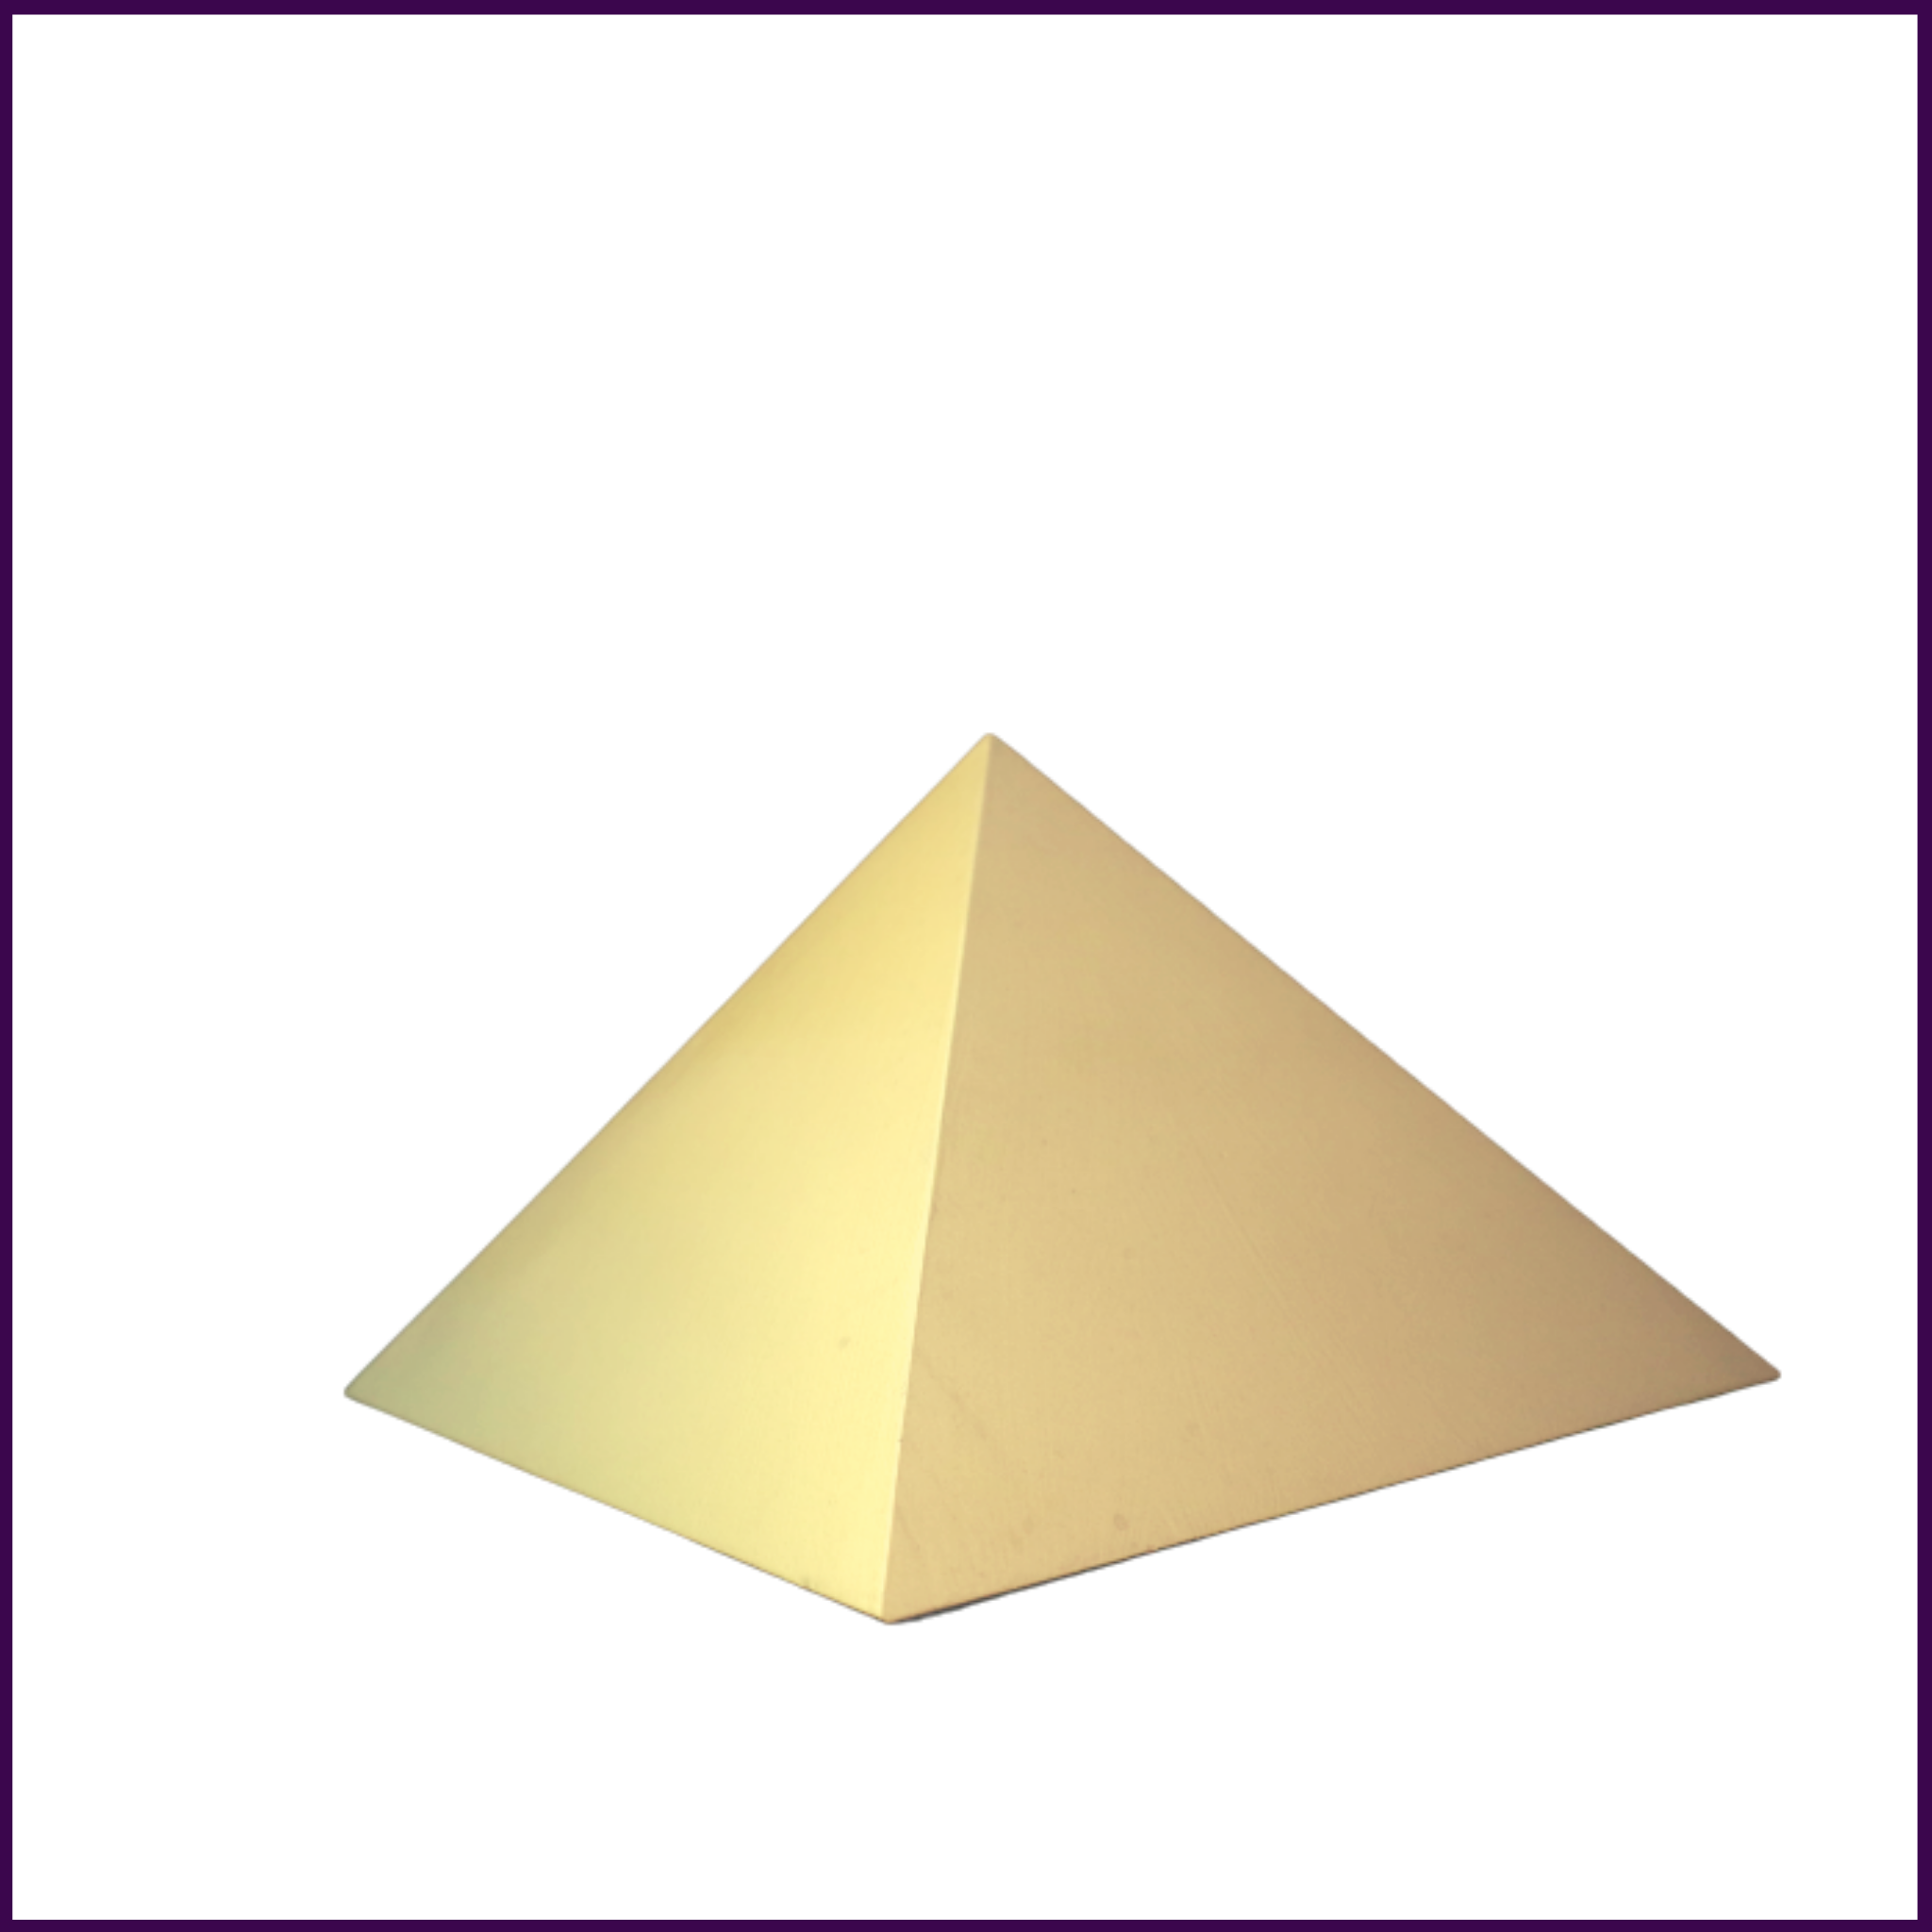 9inch MDF Wood Pyramid Head Cap for Meditation (Gold Painted) - 51pyramids